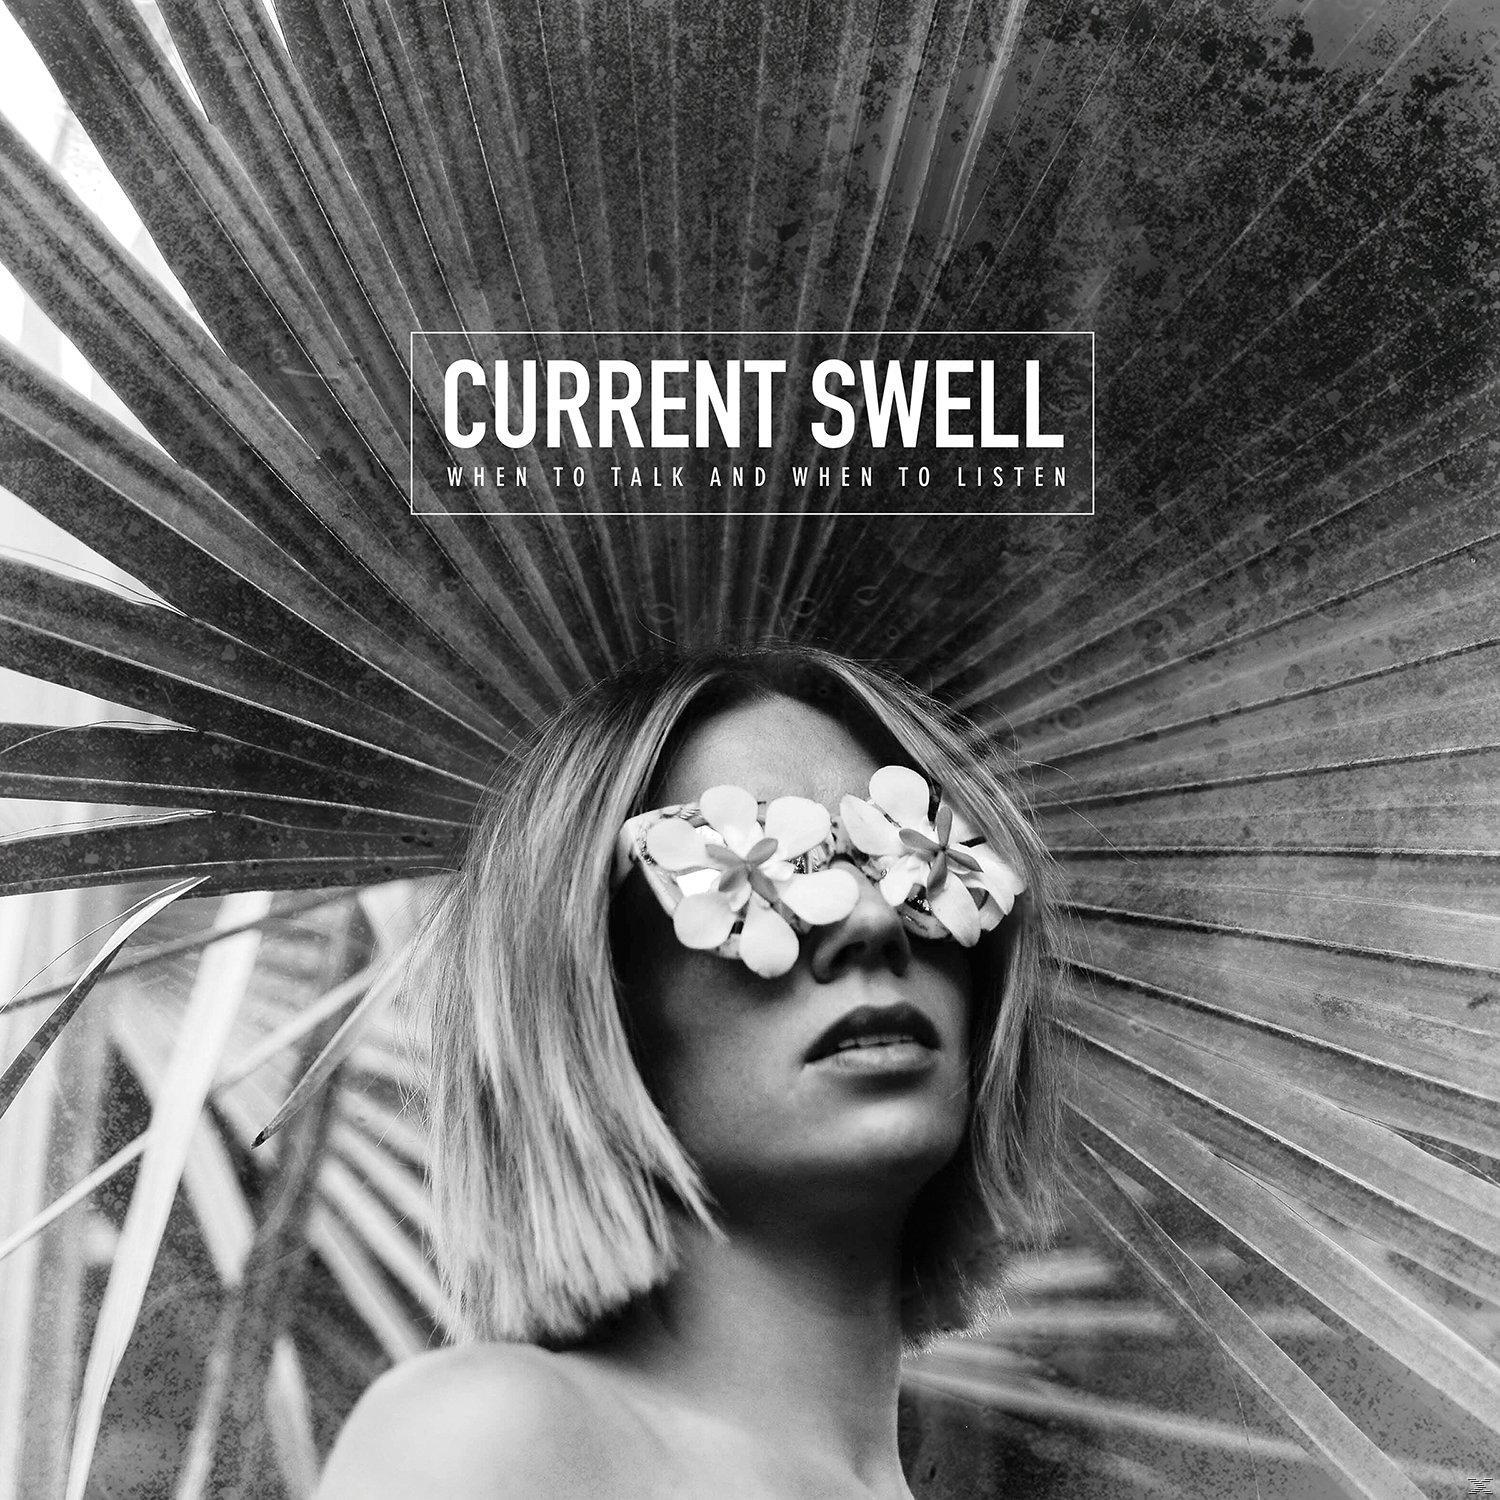 Current Swell - When and (Vinyl) to Listen Talk When - to